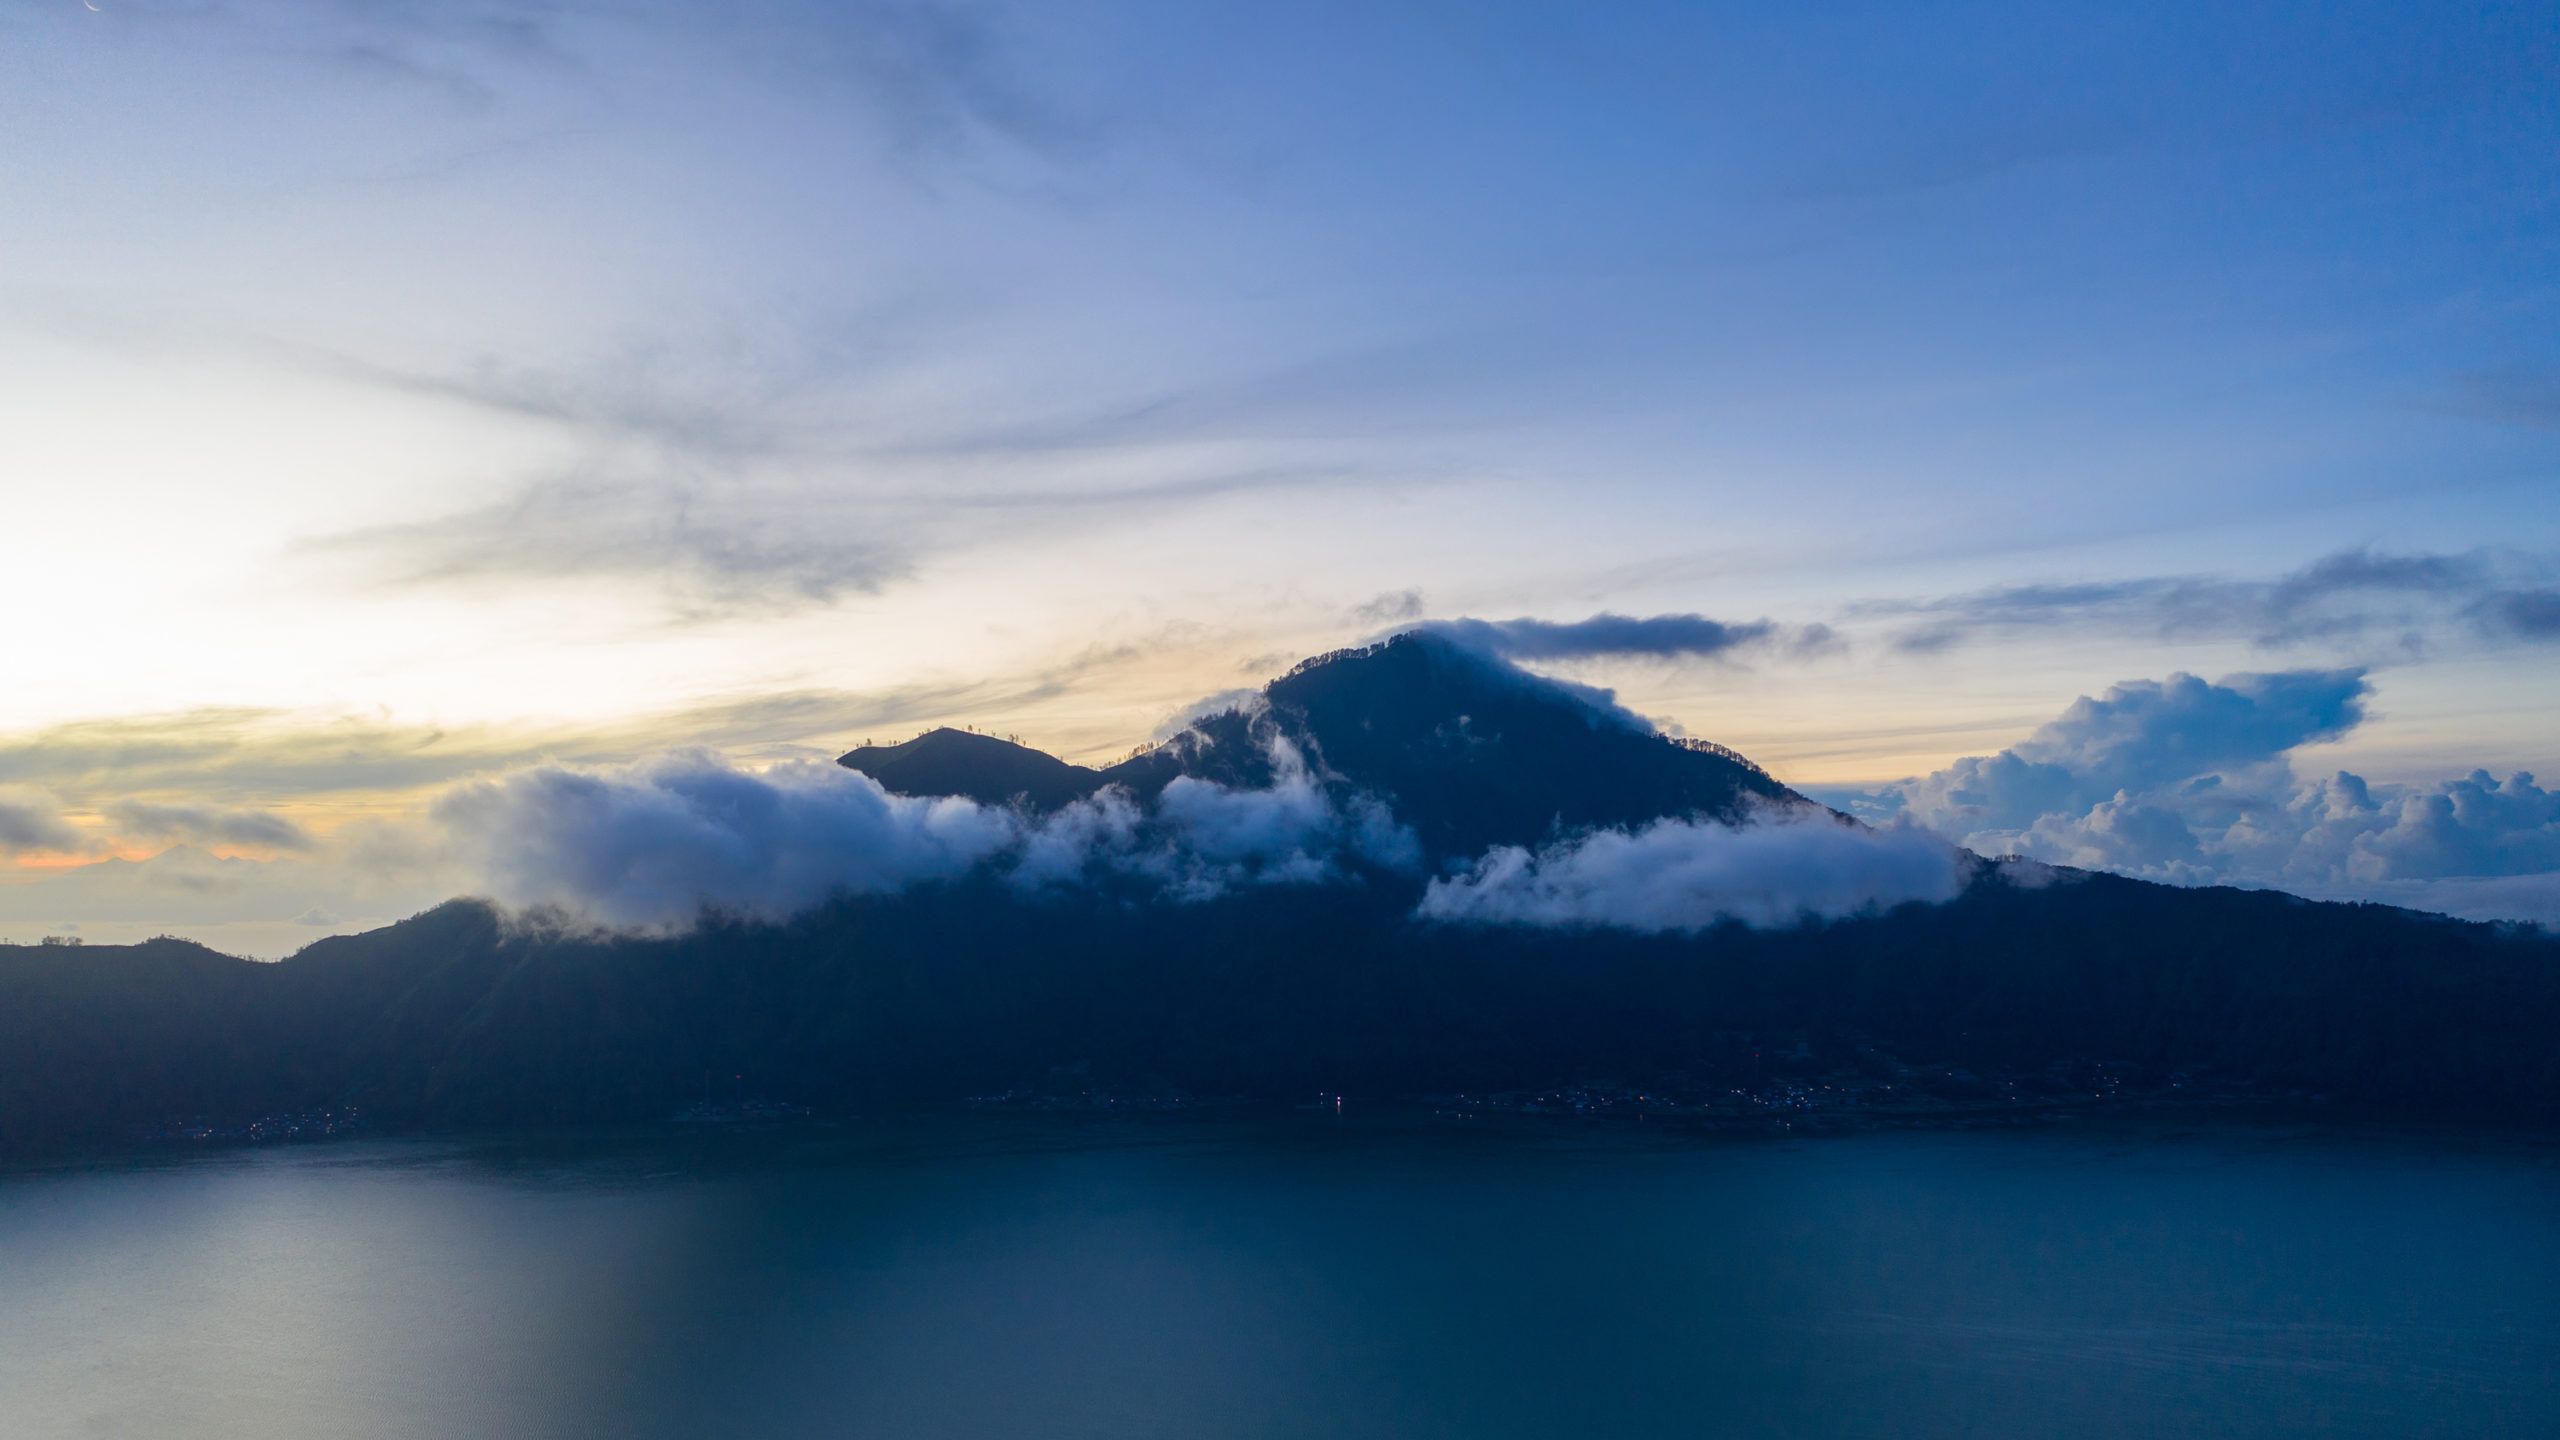 Mount Batur, Bali, surrounded by low clouds